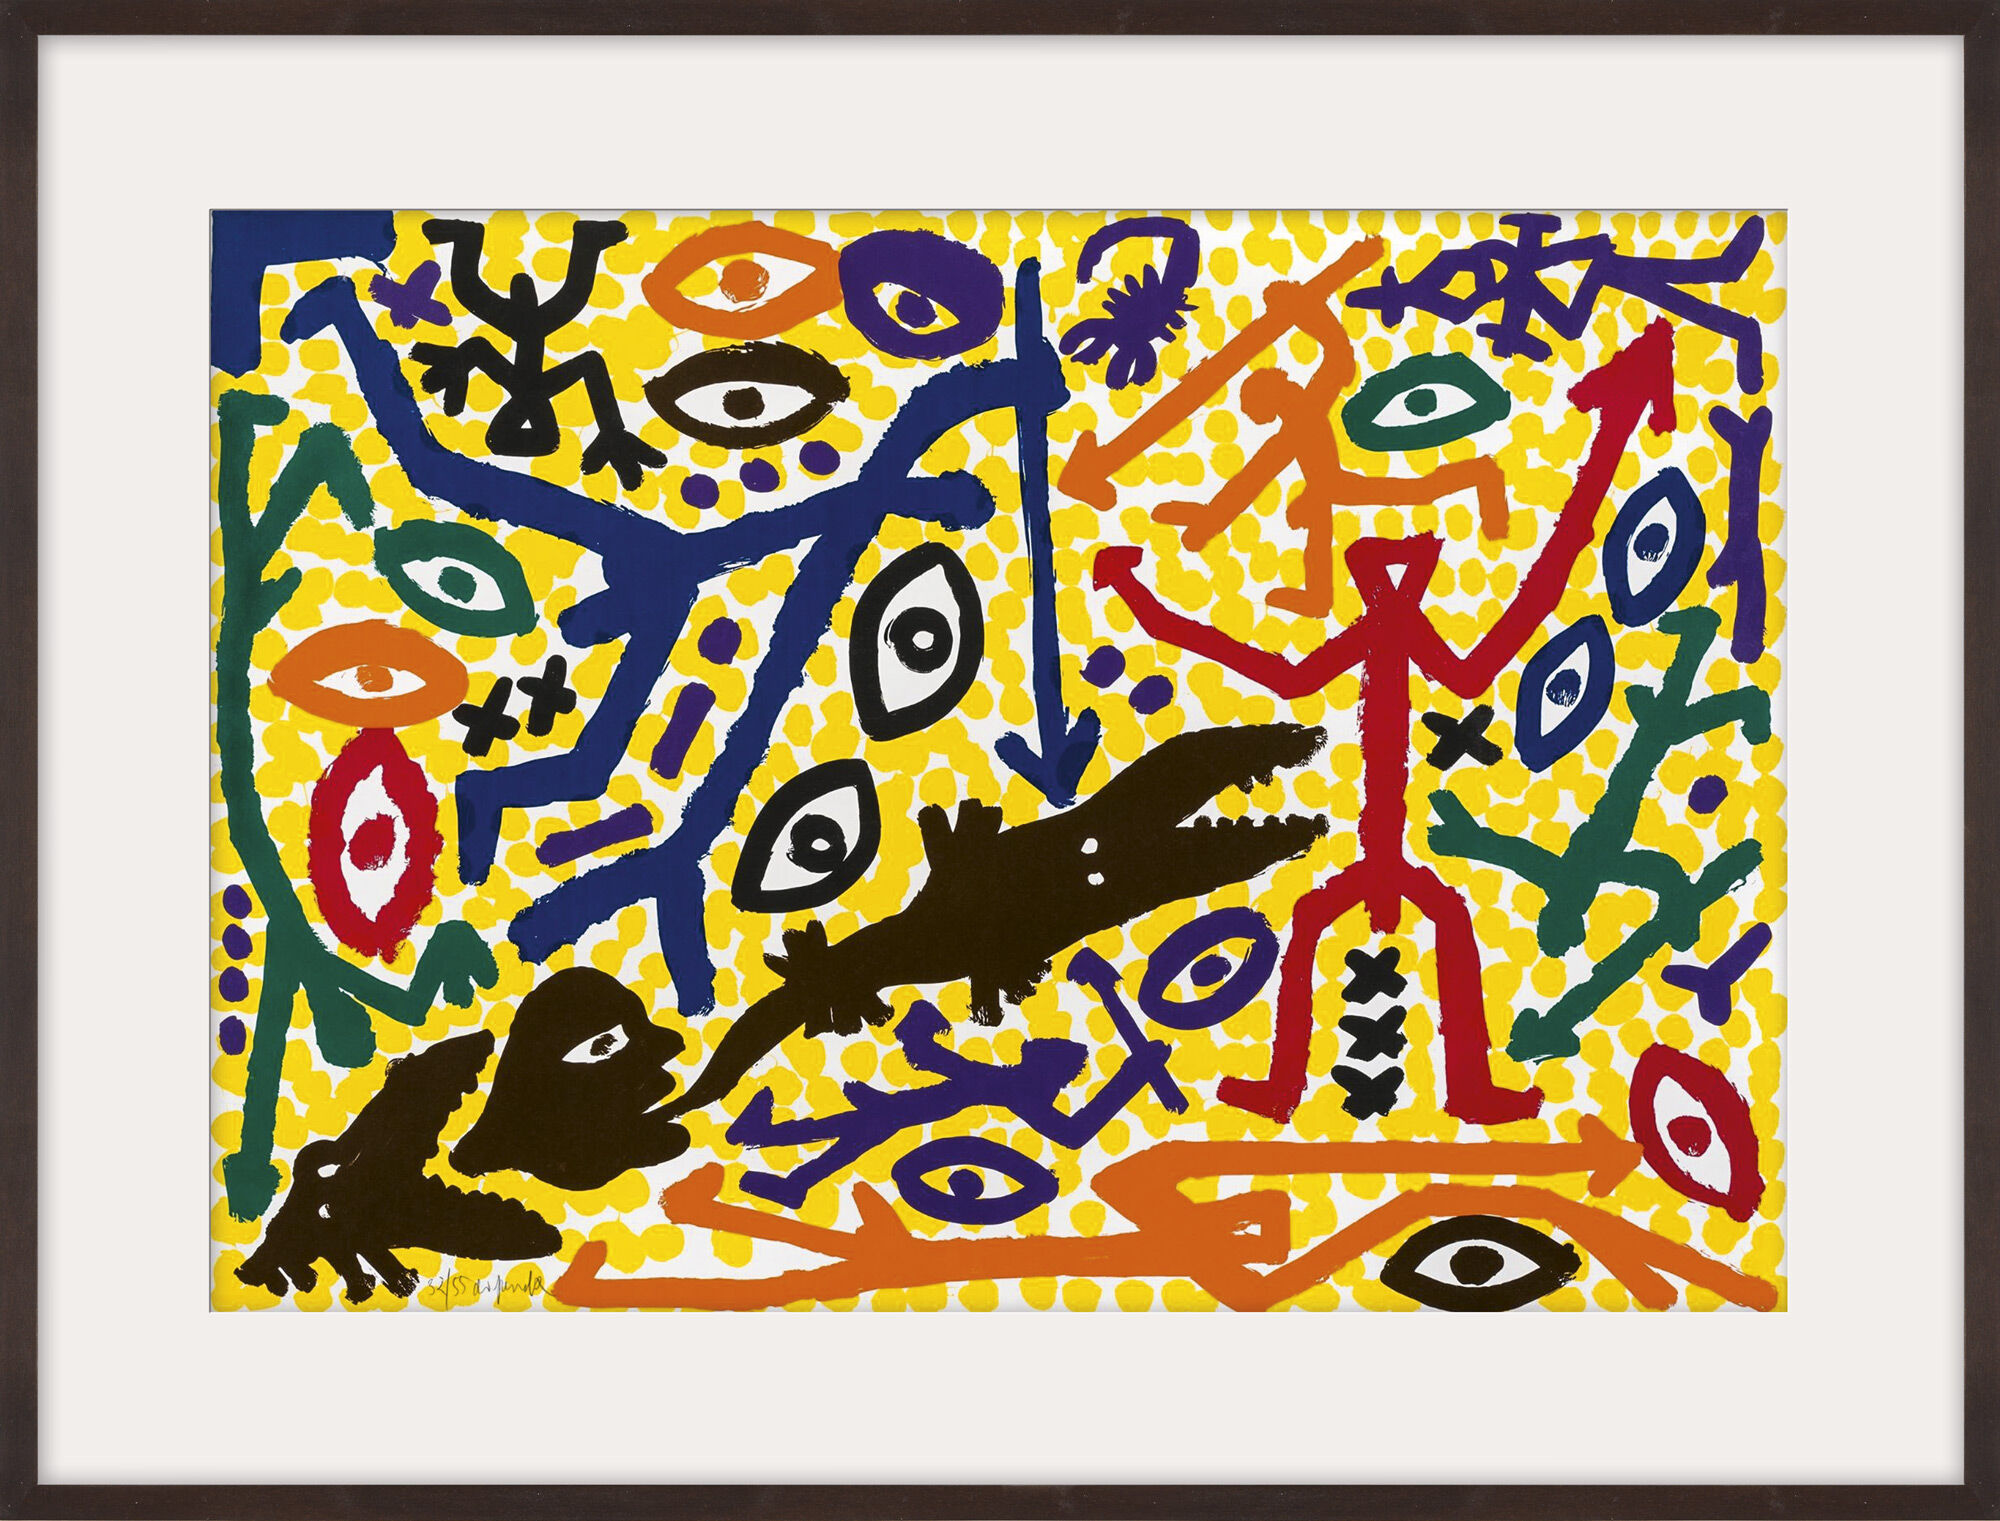 Picture "Hunting" (1991) by A. R. Penck